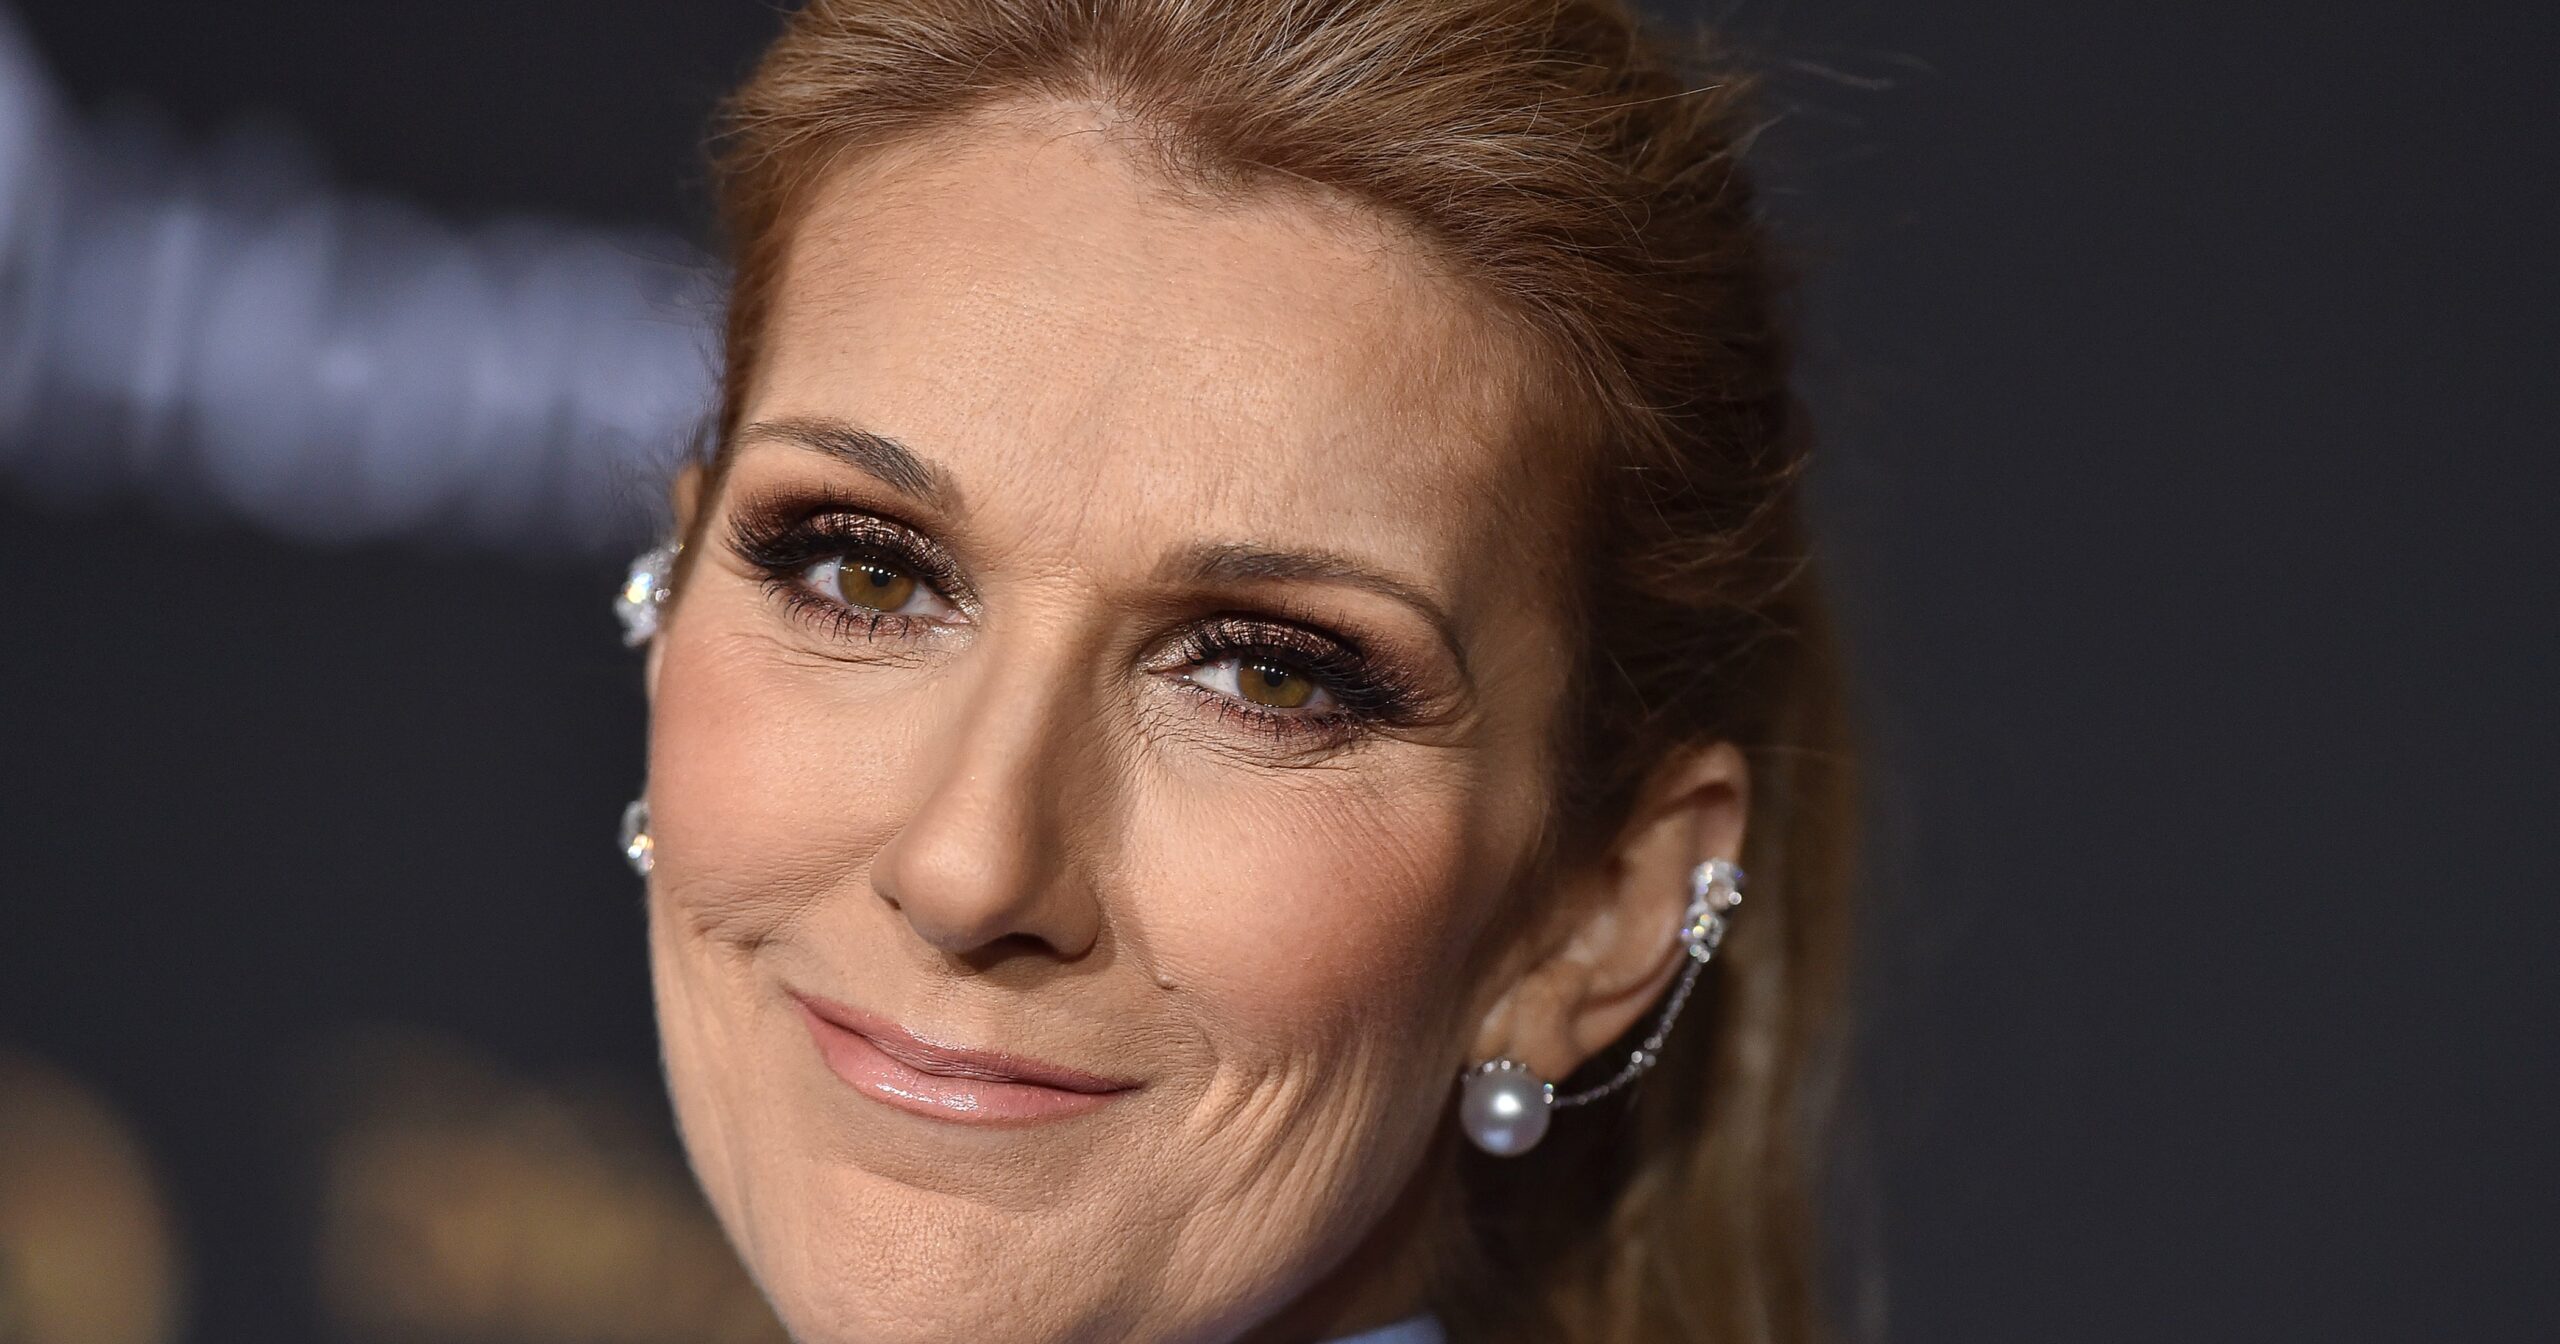 celine-dion-makes-her-first-public-appearance-since-announcing-her-stiff-person-syndrome-diagnosis